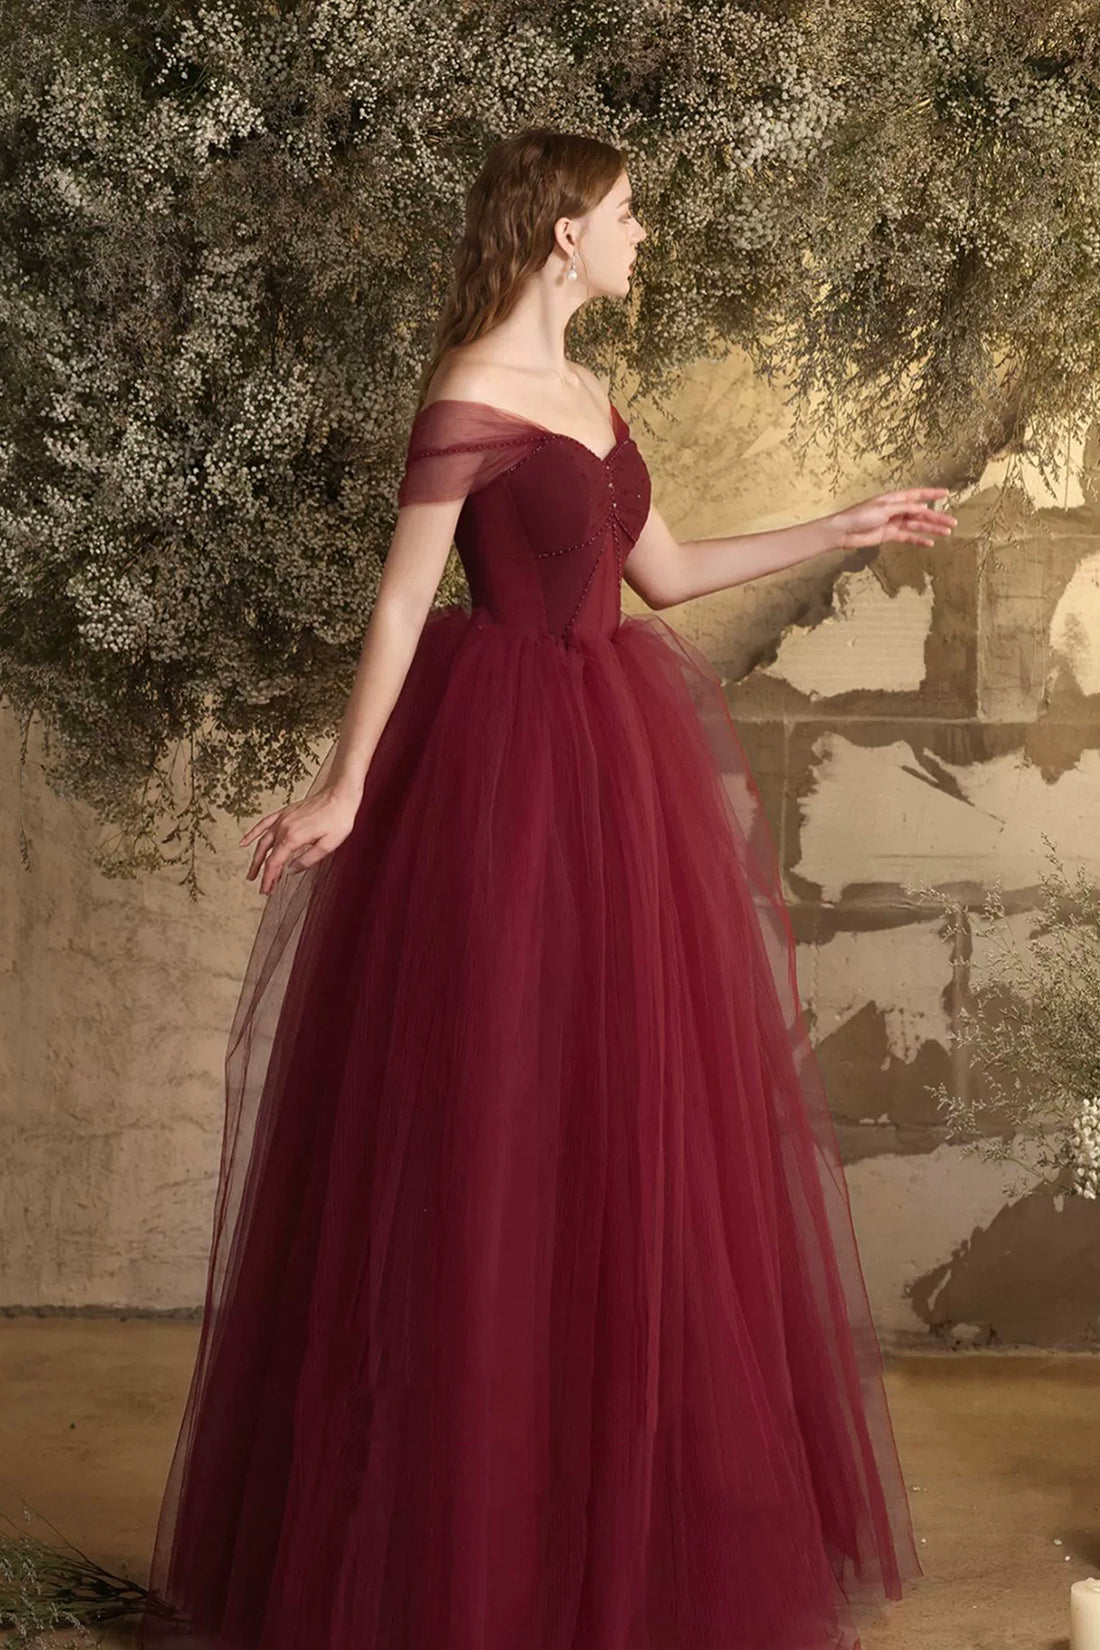 Burgundy Tulle Floor Length Prom Dress, Beautiful Off the Shoulder Evening Party Dress